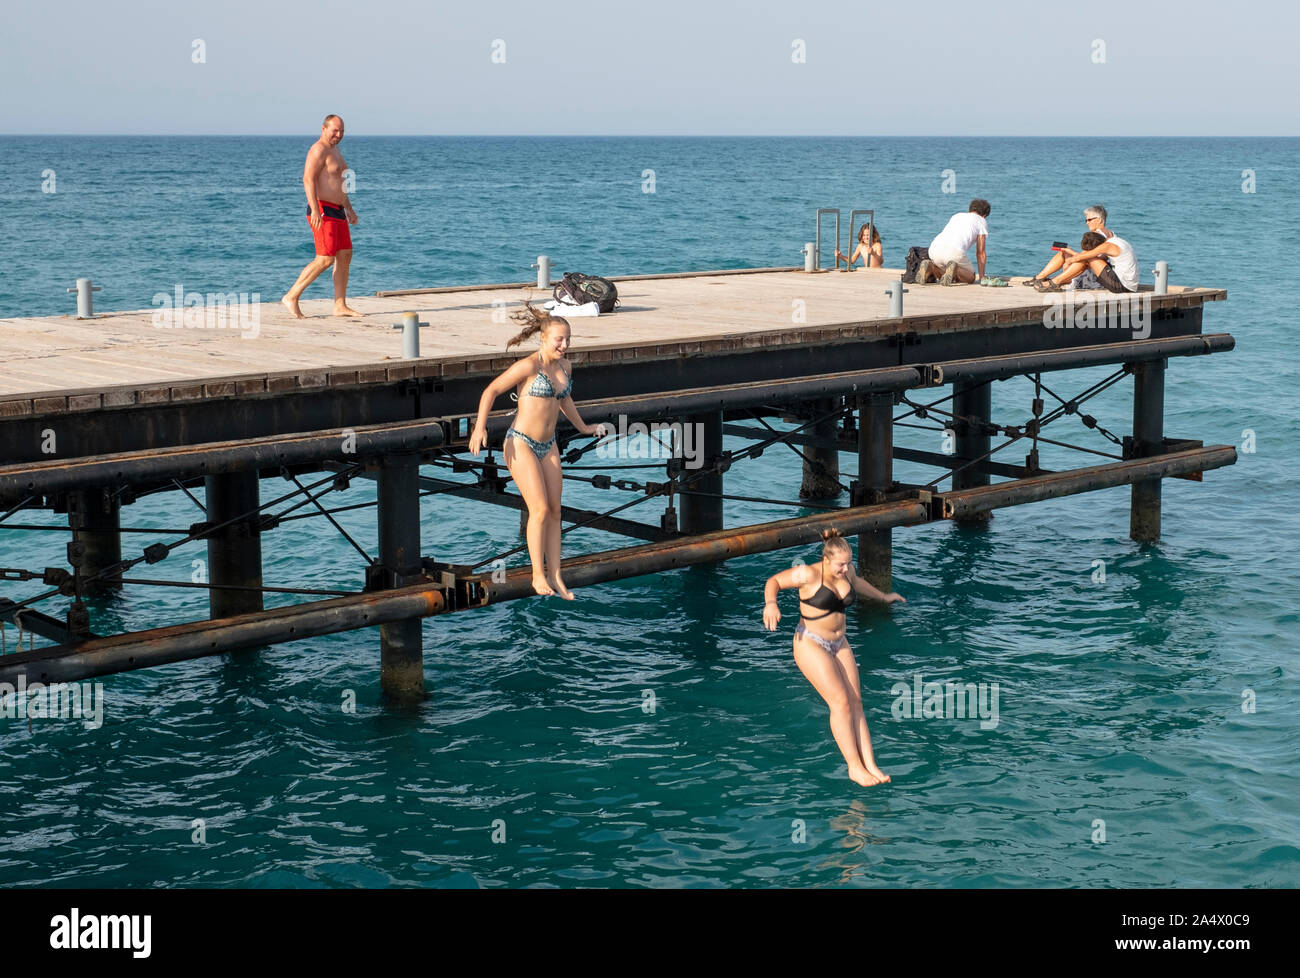 Swimmers jumping and diving into the water off Limni Pier, Argaka, Polis, Cyprus. Stock Photo